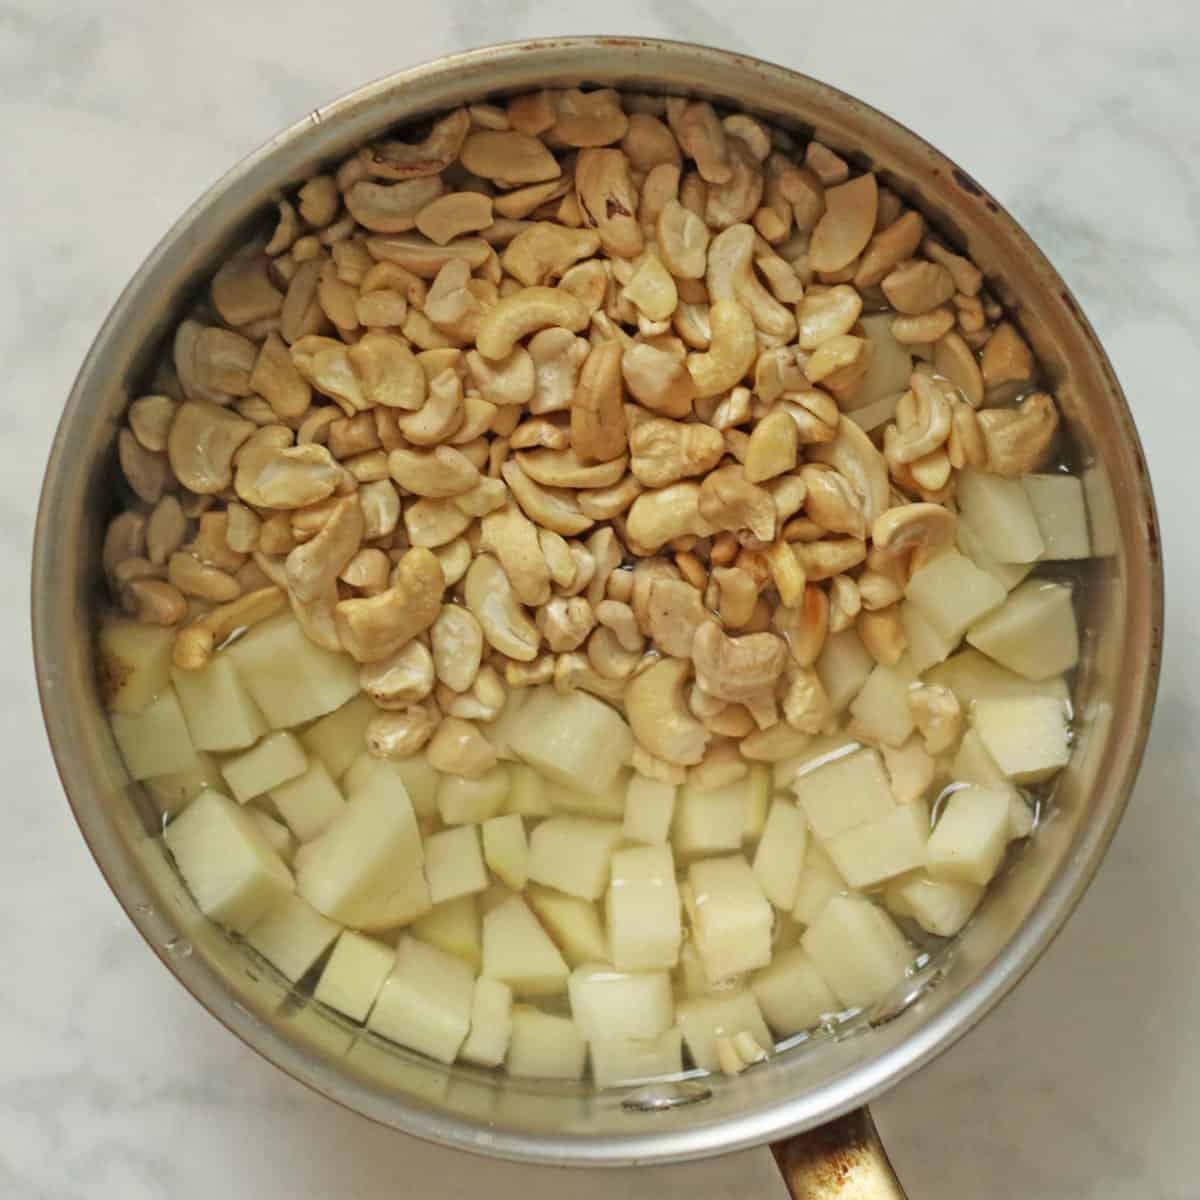 boiling potatoes and cashews in pot